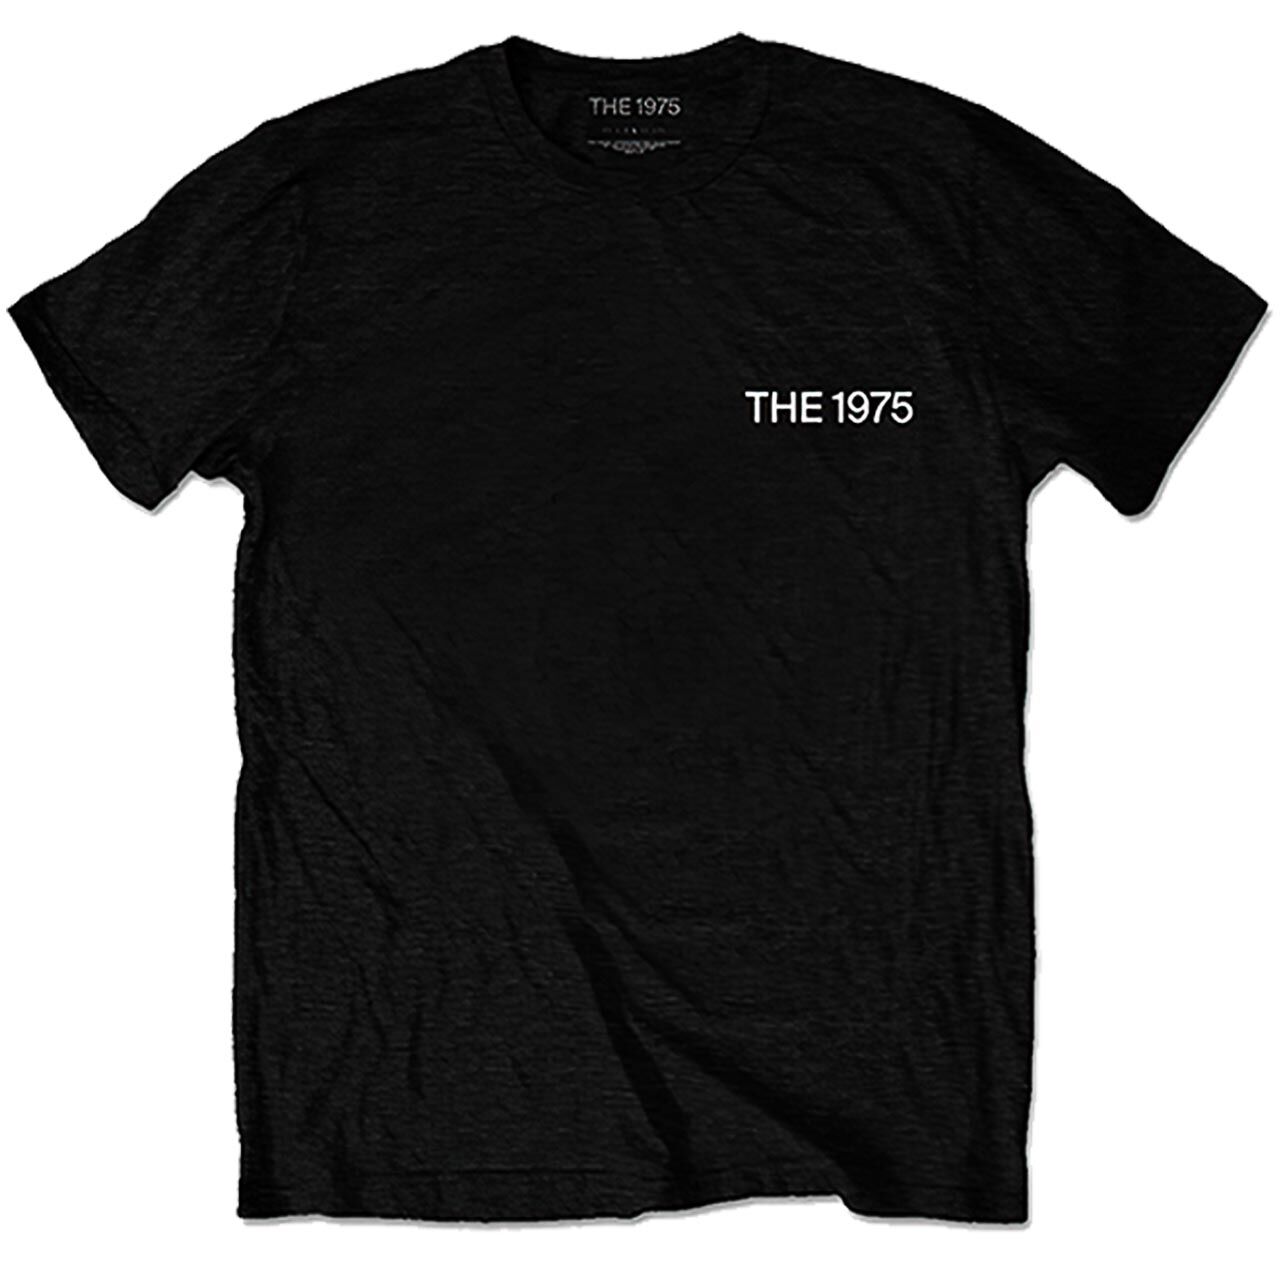 THE 1975 Abiior Welcome Version 1 Tshirt